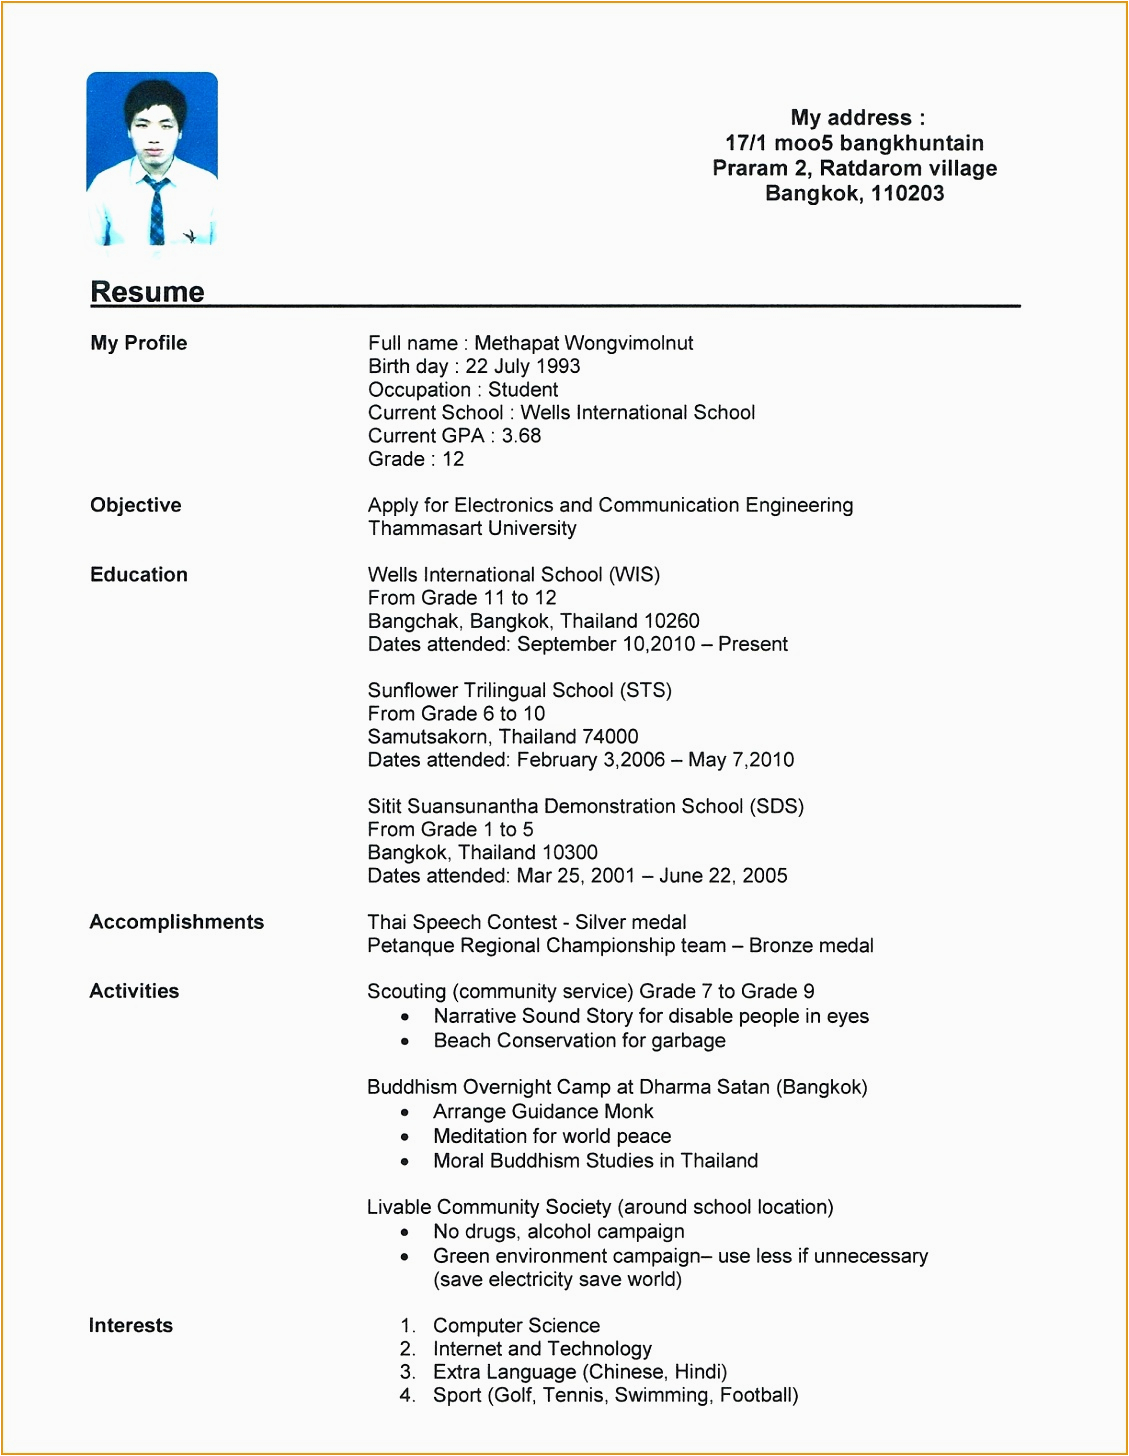 Sample Resume for College Student with No Job Experience 6 Resume Templates College Student No Job Experience